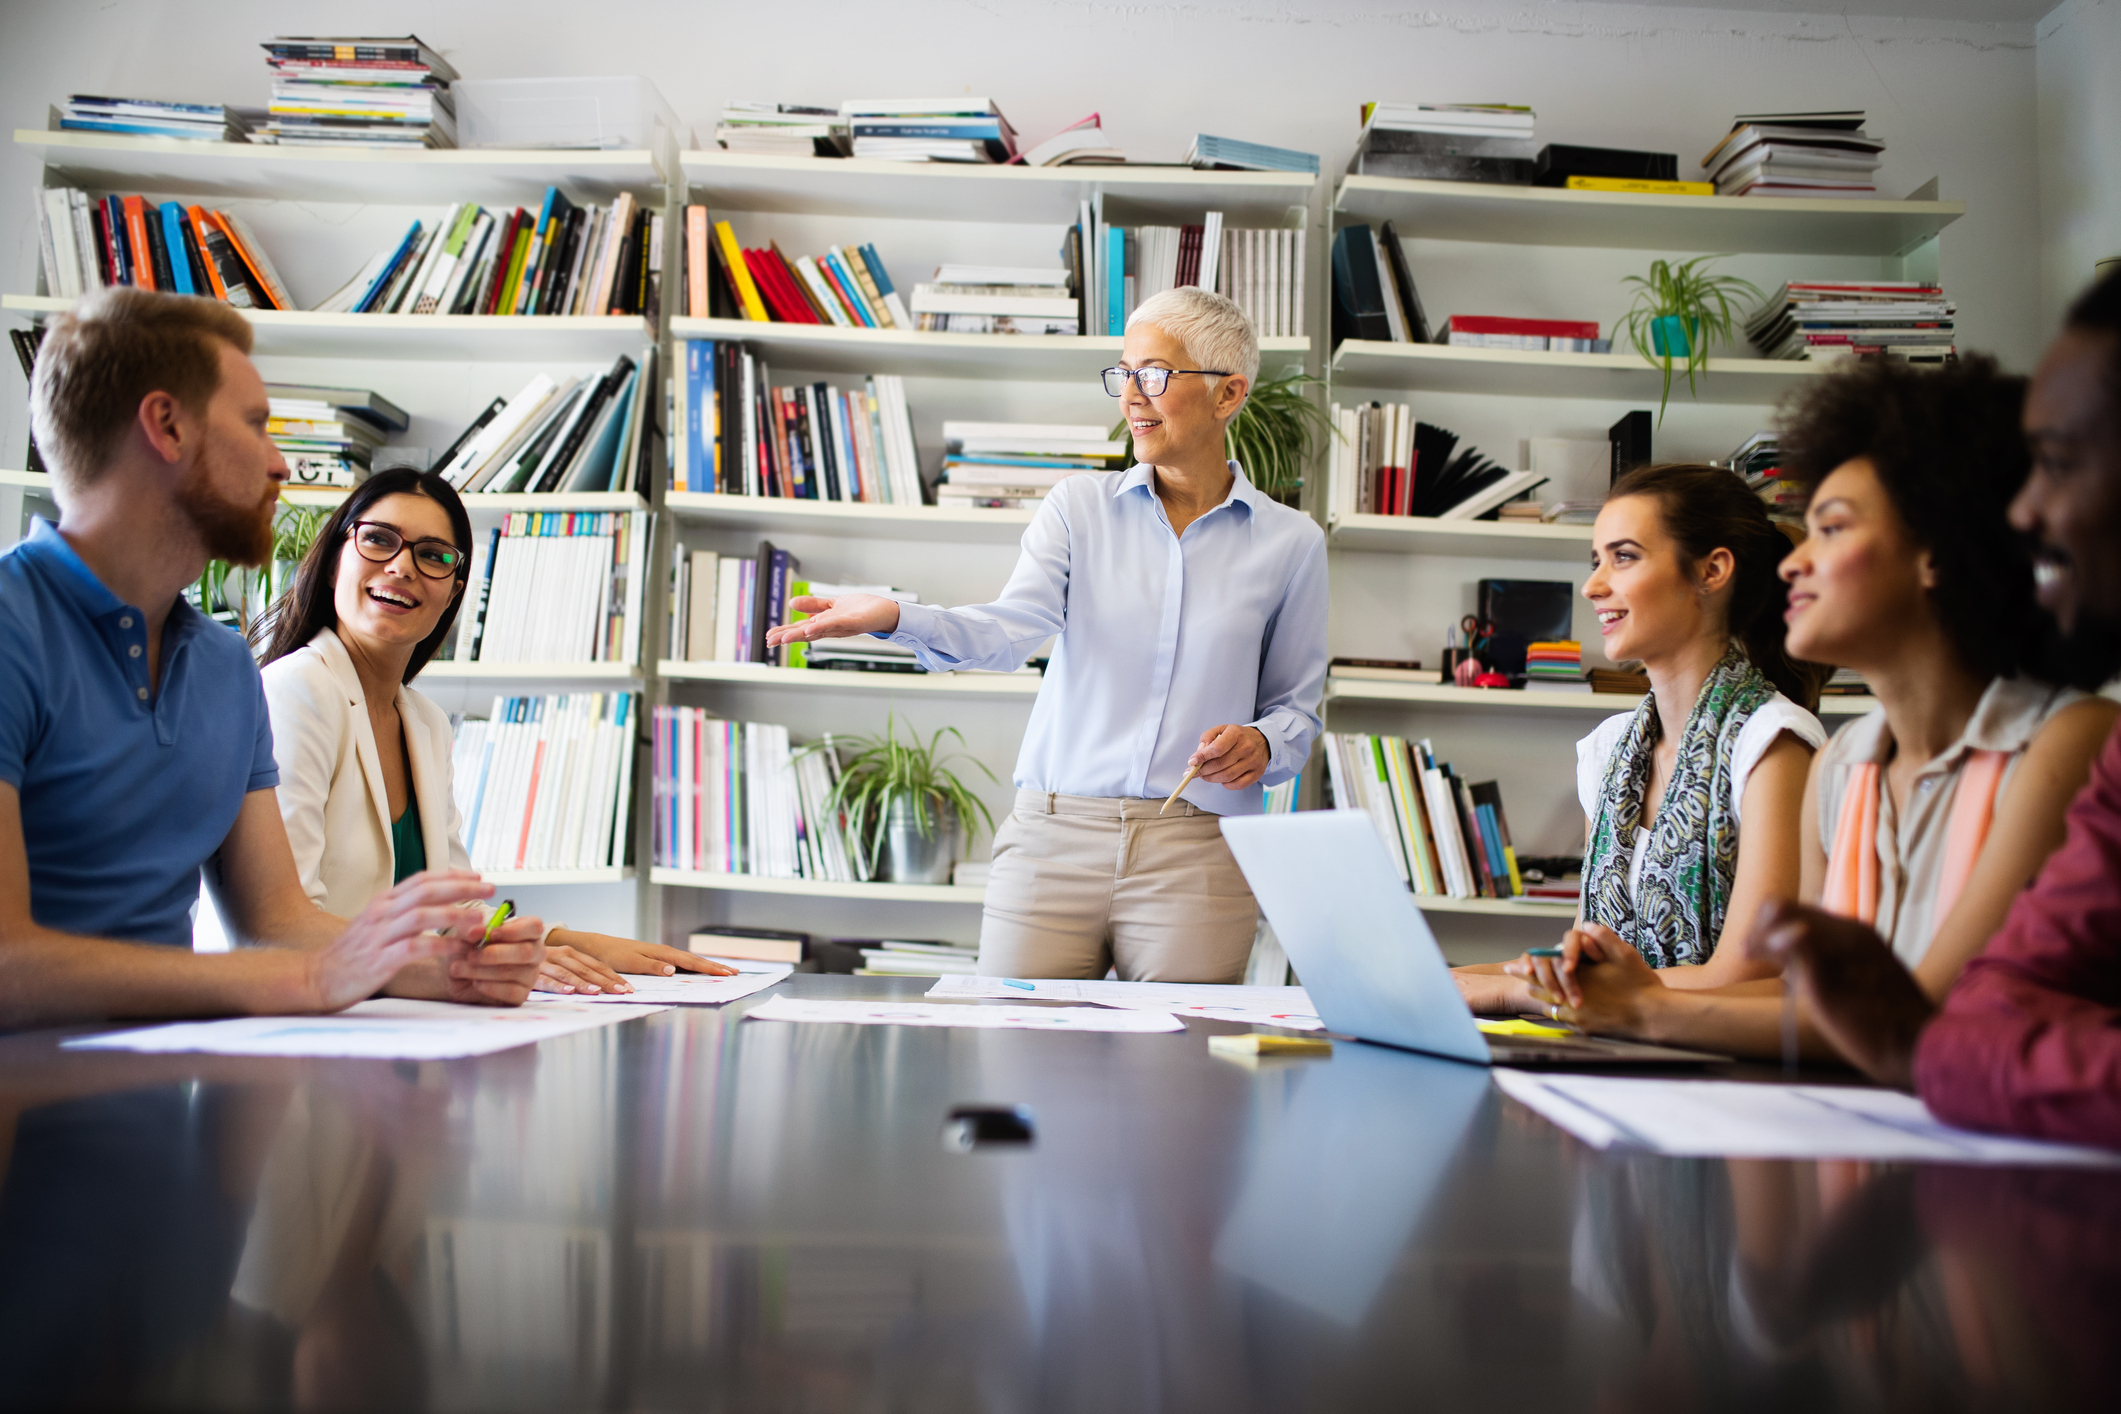 Stock Image of Team Meeting Older Woman Is Standing at the Head of the Table Explaining Something To Five Individuals Around the Table